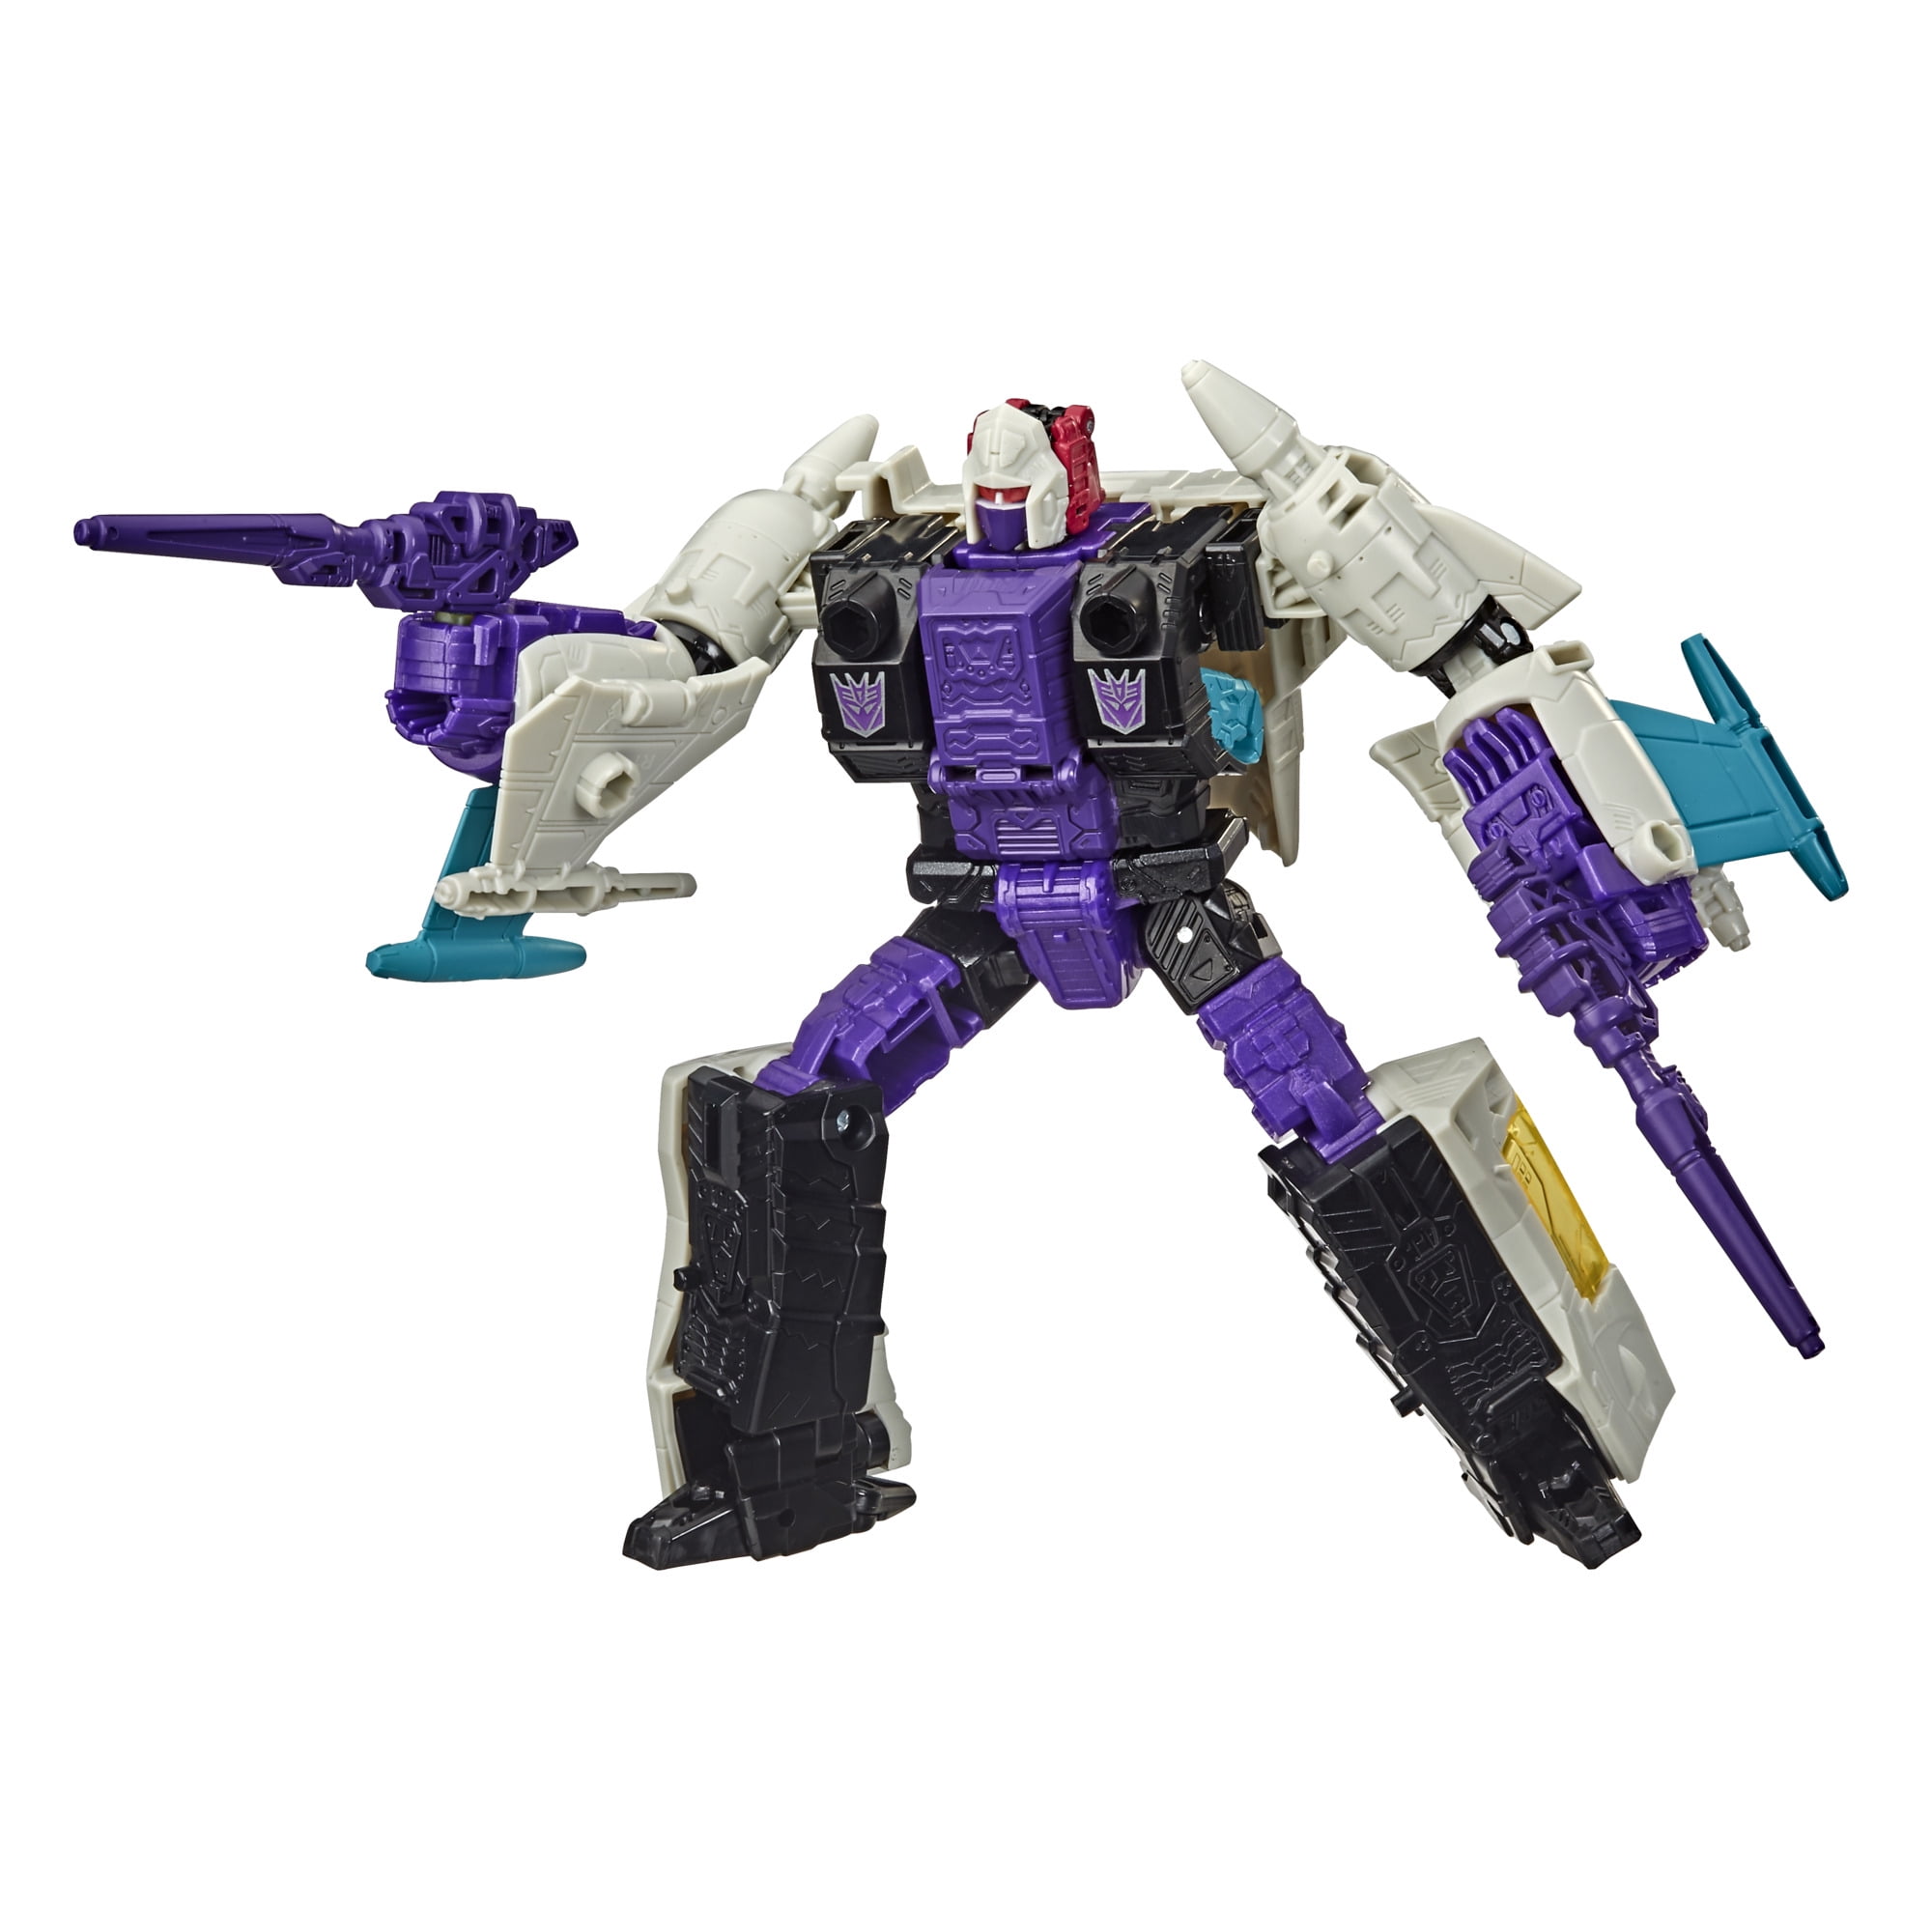 Hasbro WFCE21 Cybertron Earthrise Snapdragon 7 inch Transformer Action Figure for sale online 